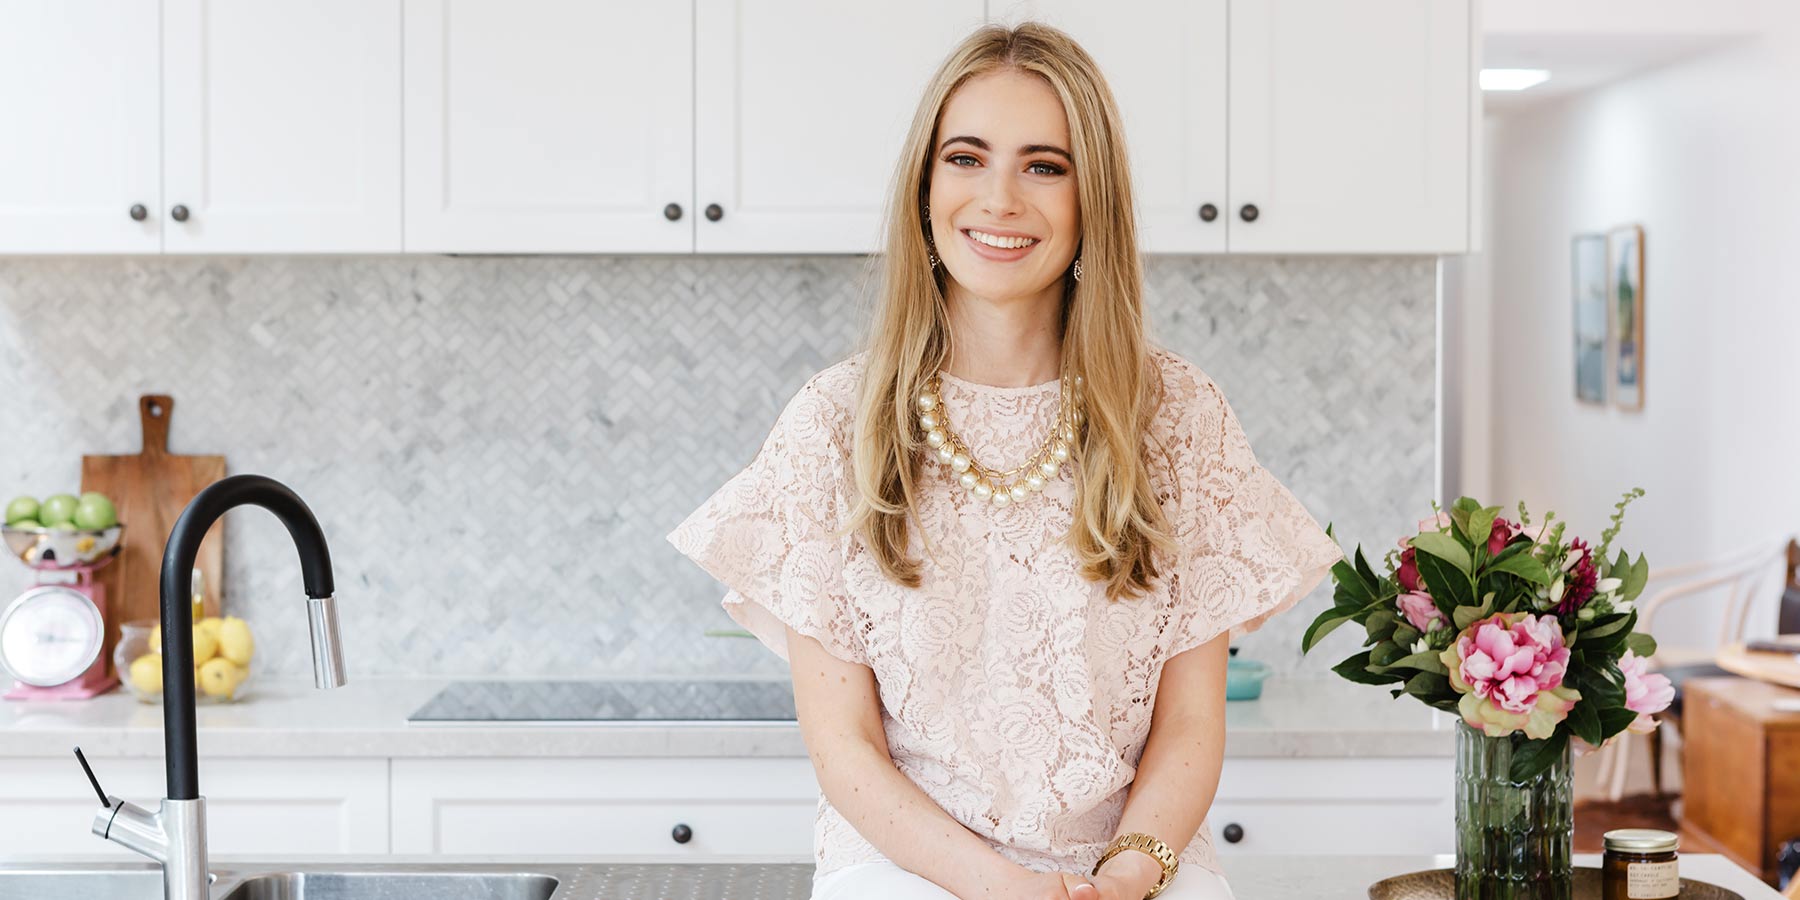 young woman with blonde long hair and pink top in front of white kitchen cupboards - professionals